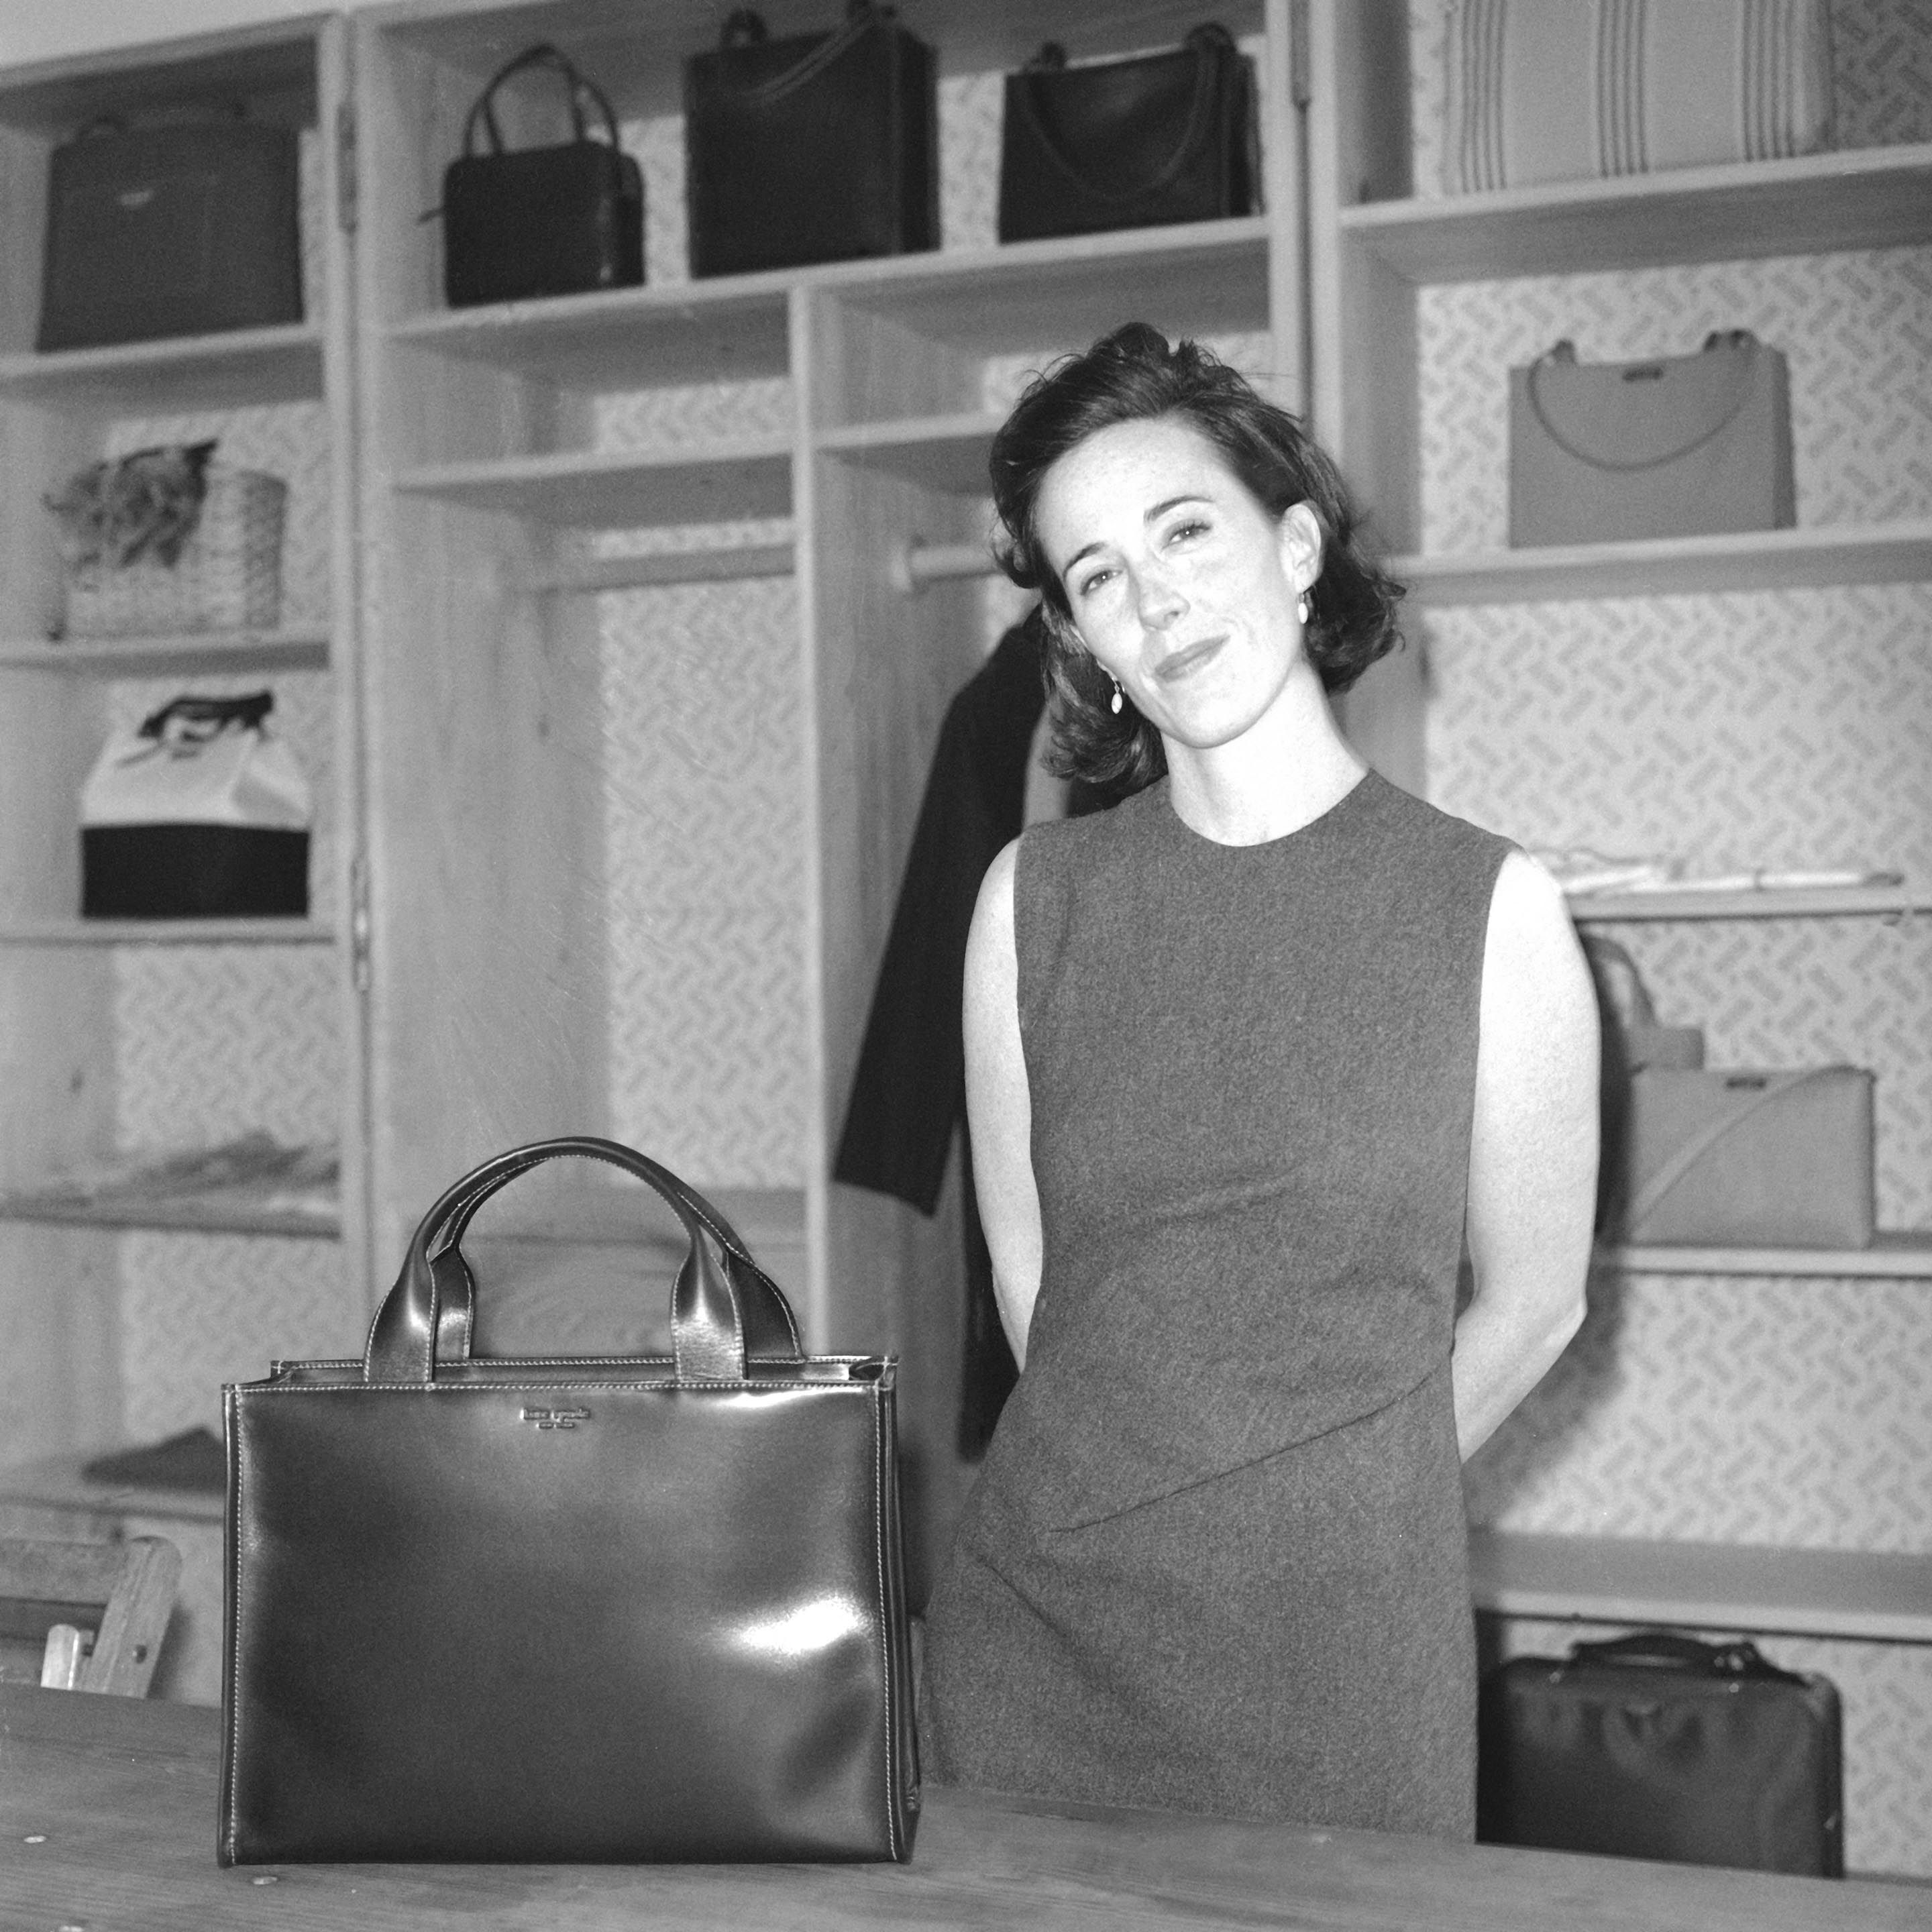 Kate Spade's Family Release Statement — Kate Spade Suicide Family